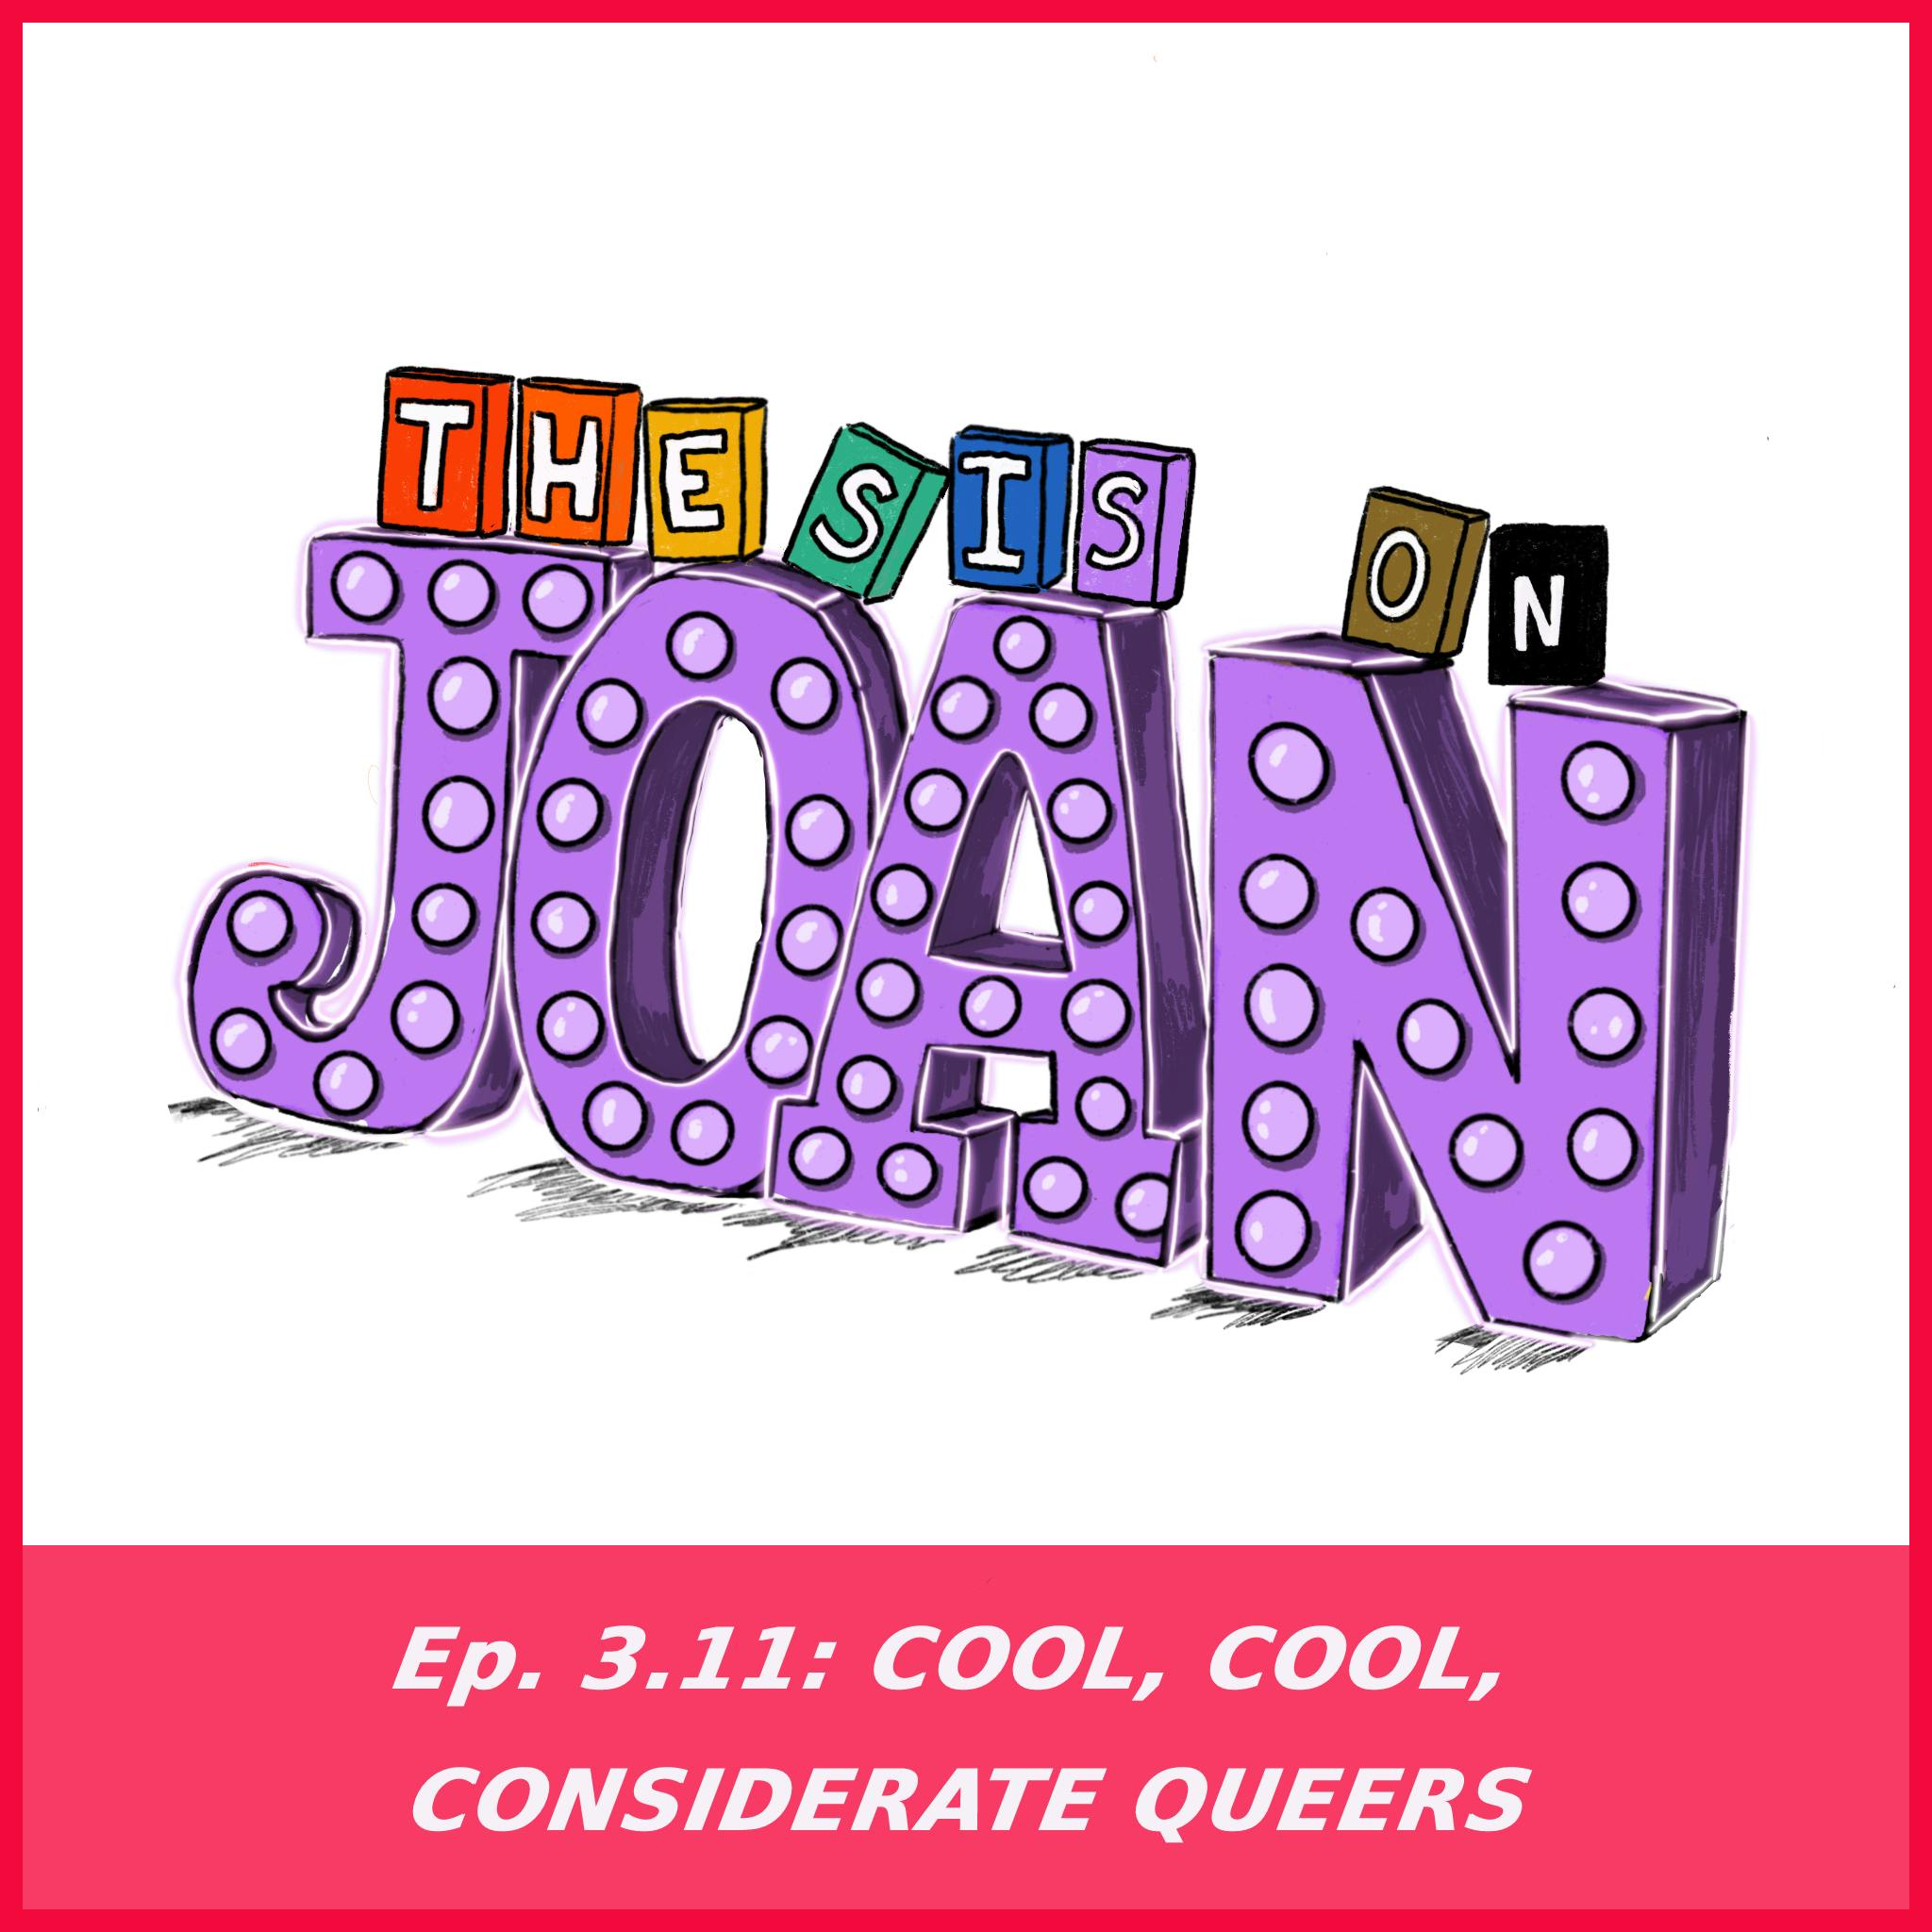 #3.11 Cool, Cool, Considerate Queers